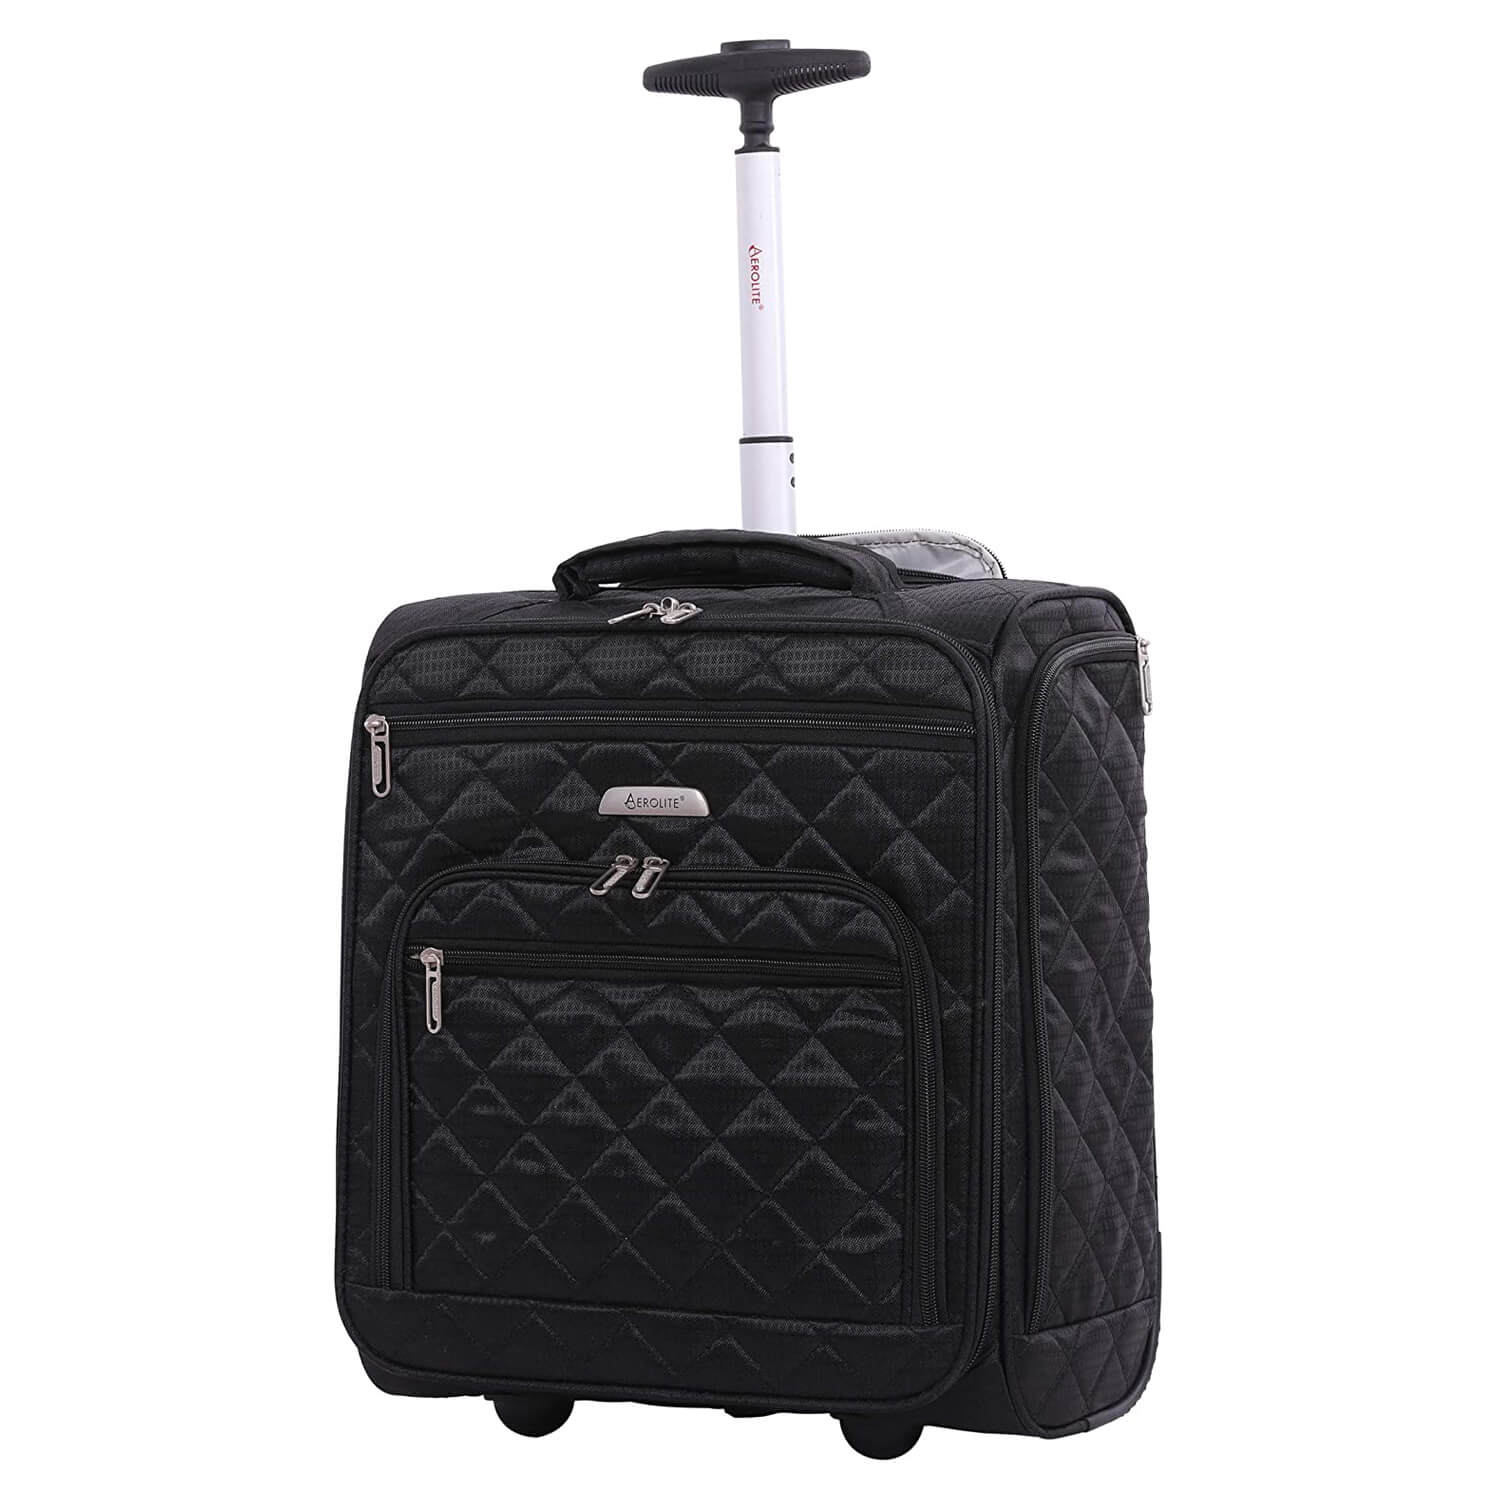 Aerolite easyJet Carry On Cabin New & Improved 2024 Model Hand Luggage fits easyJet (45x36x20cm) Allowance, Under Seat Cabin Trolley Suitcase Bag, 5 Years Warranty, 28L